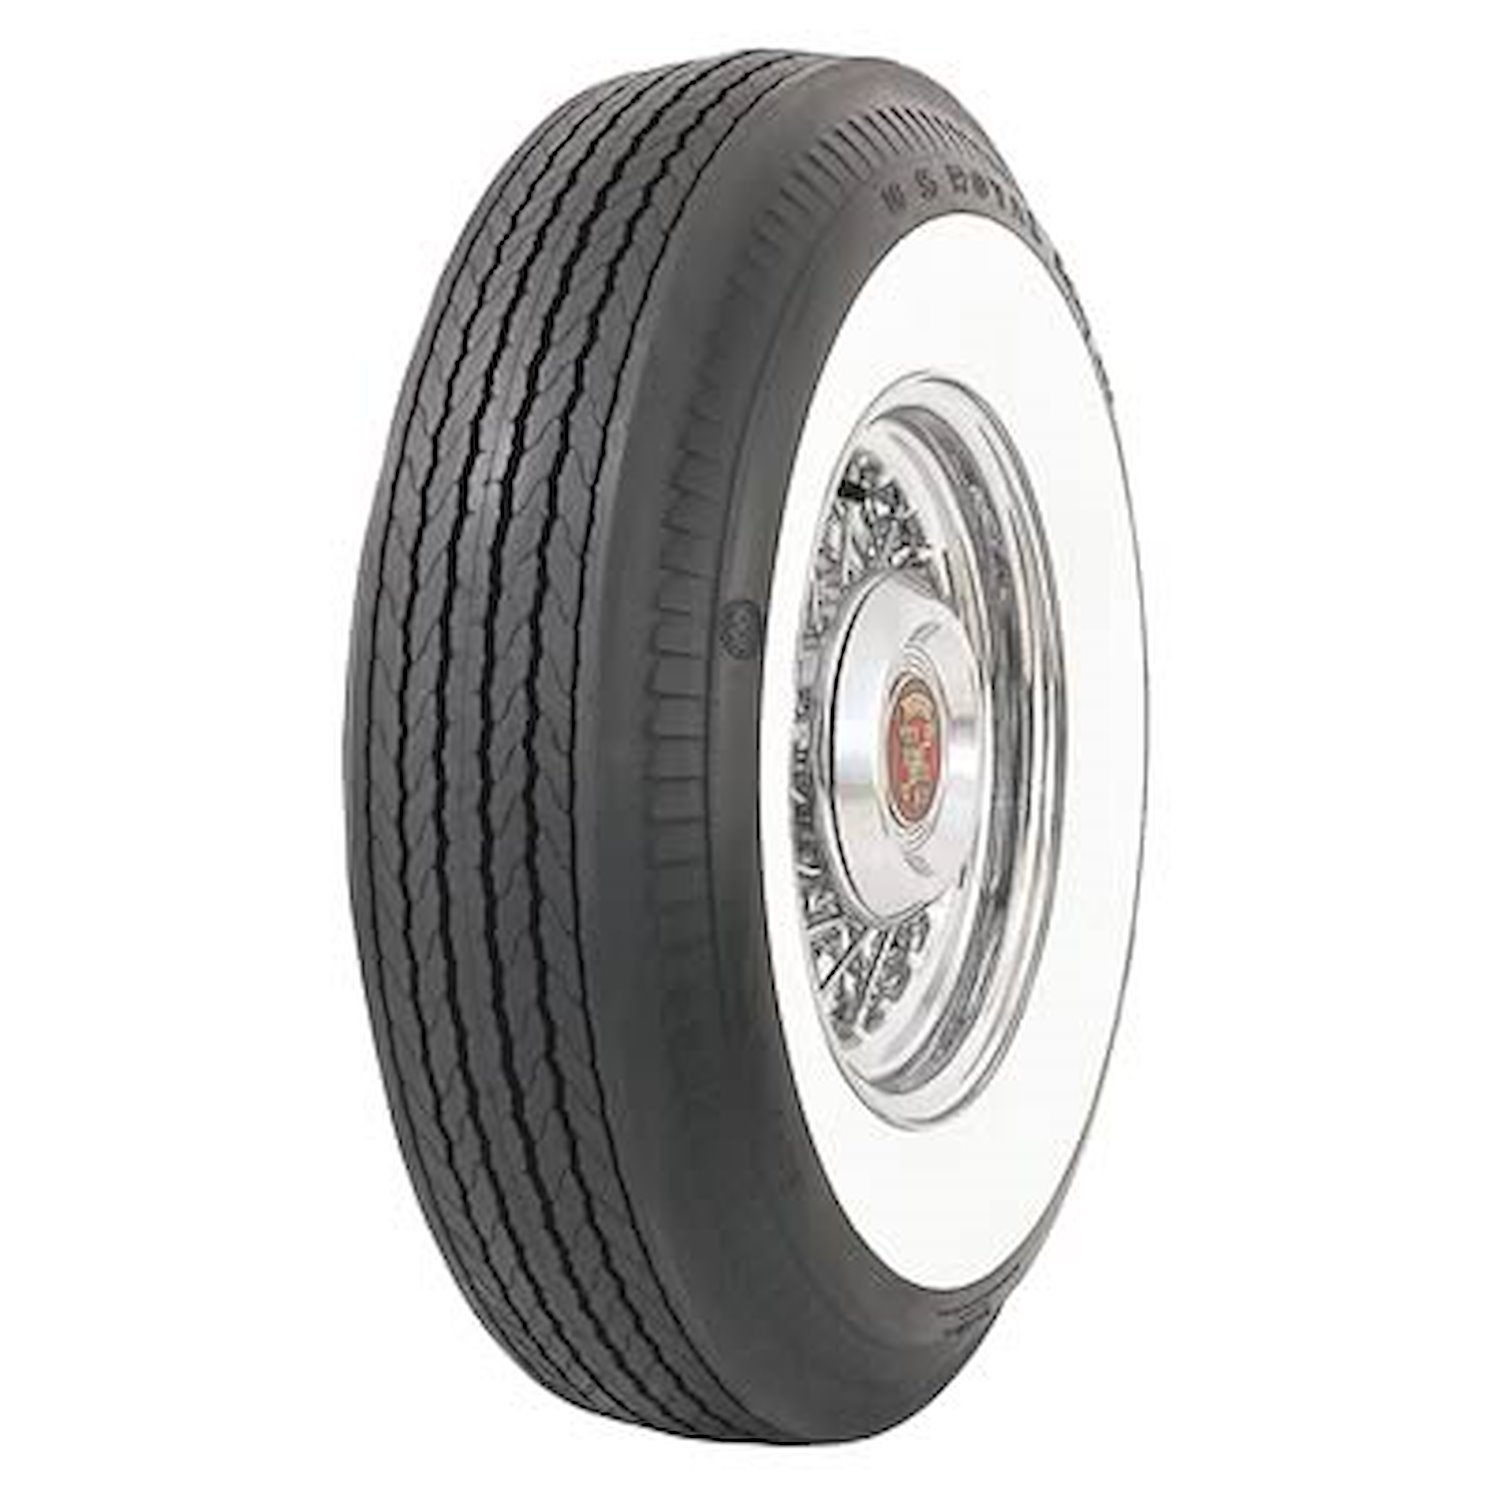 61993 Tire, US Royal 3.50-Inch Whitewall, 820-15